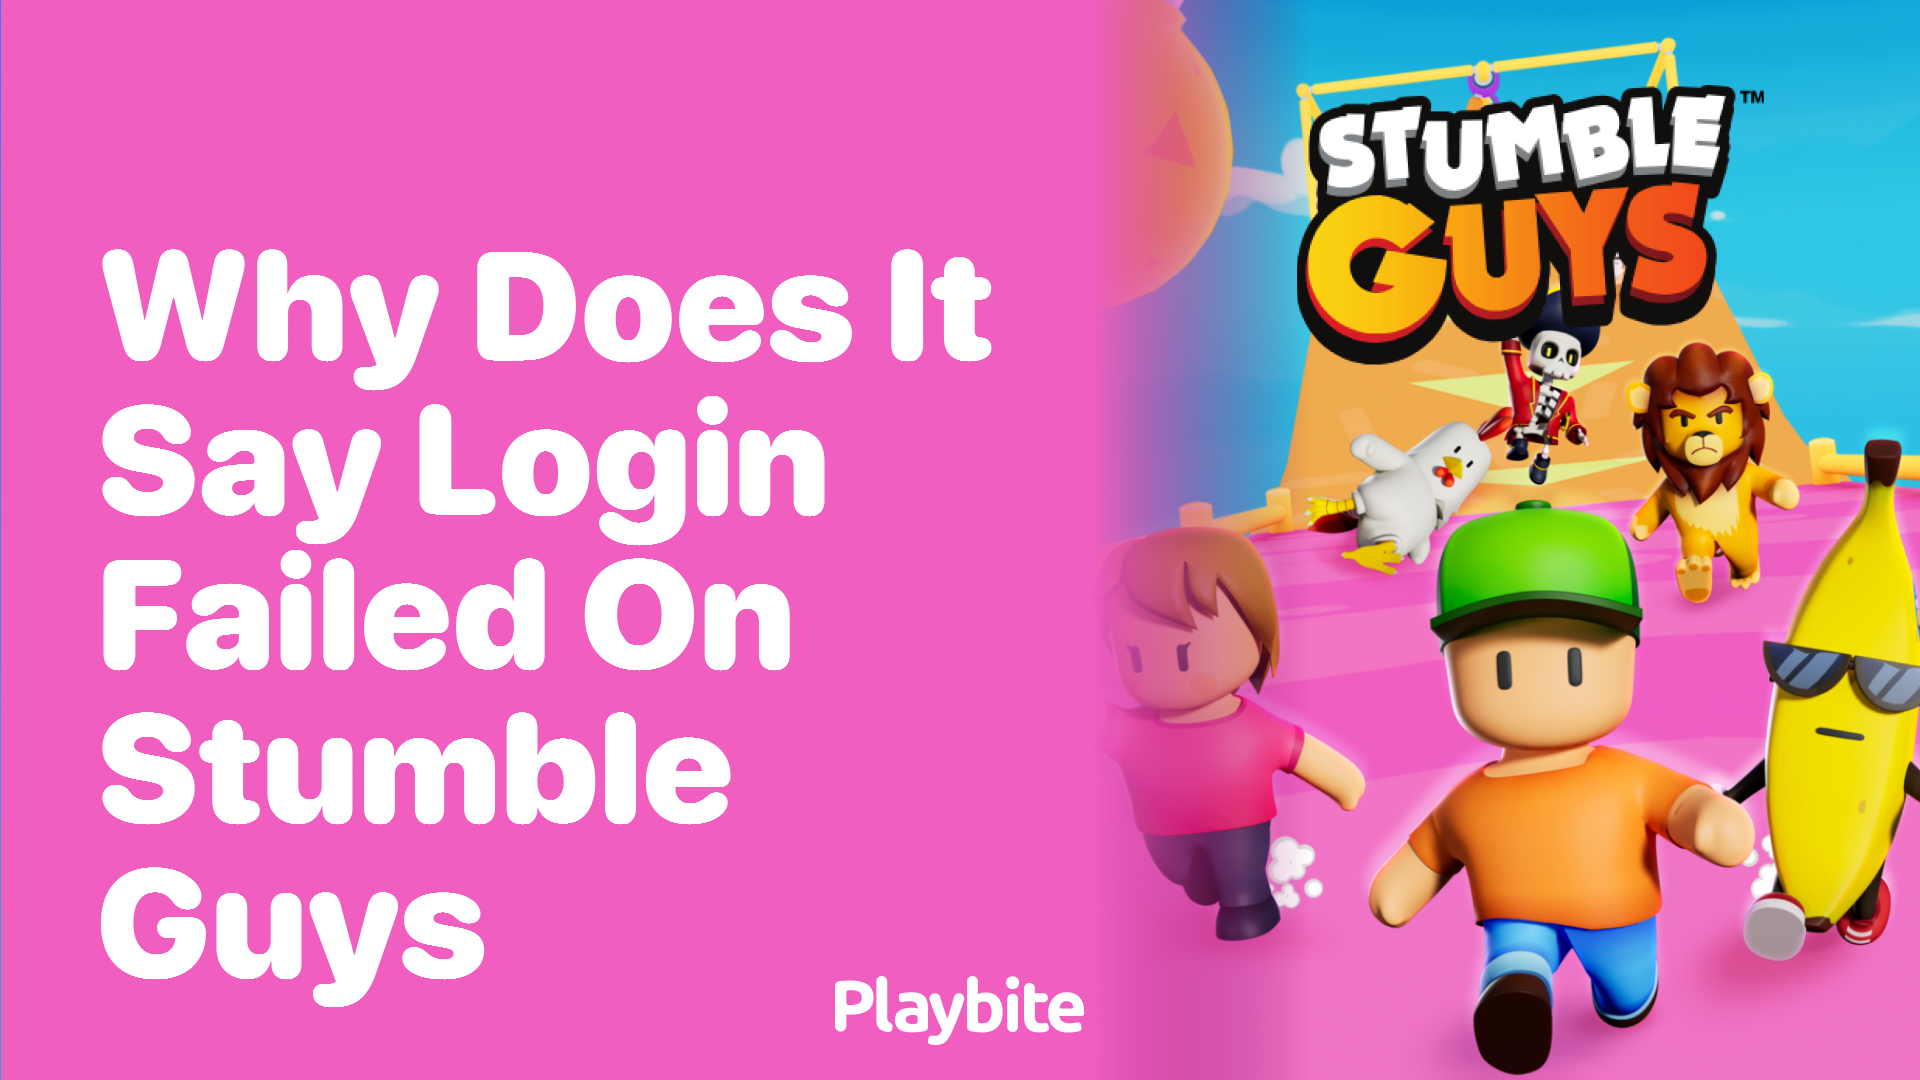 Why Does It Say Login Failed on Stumble Guys?